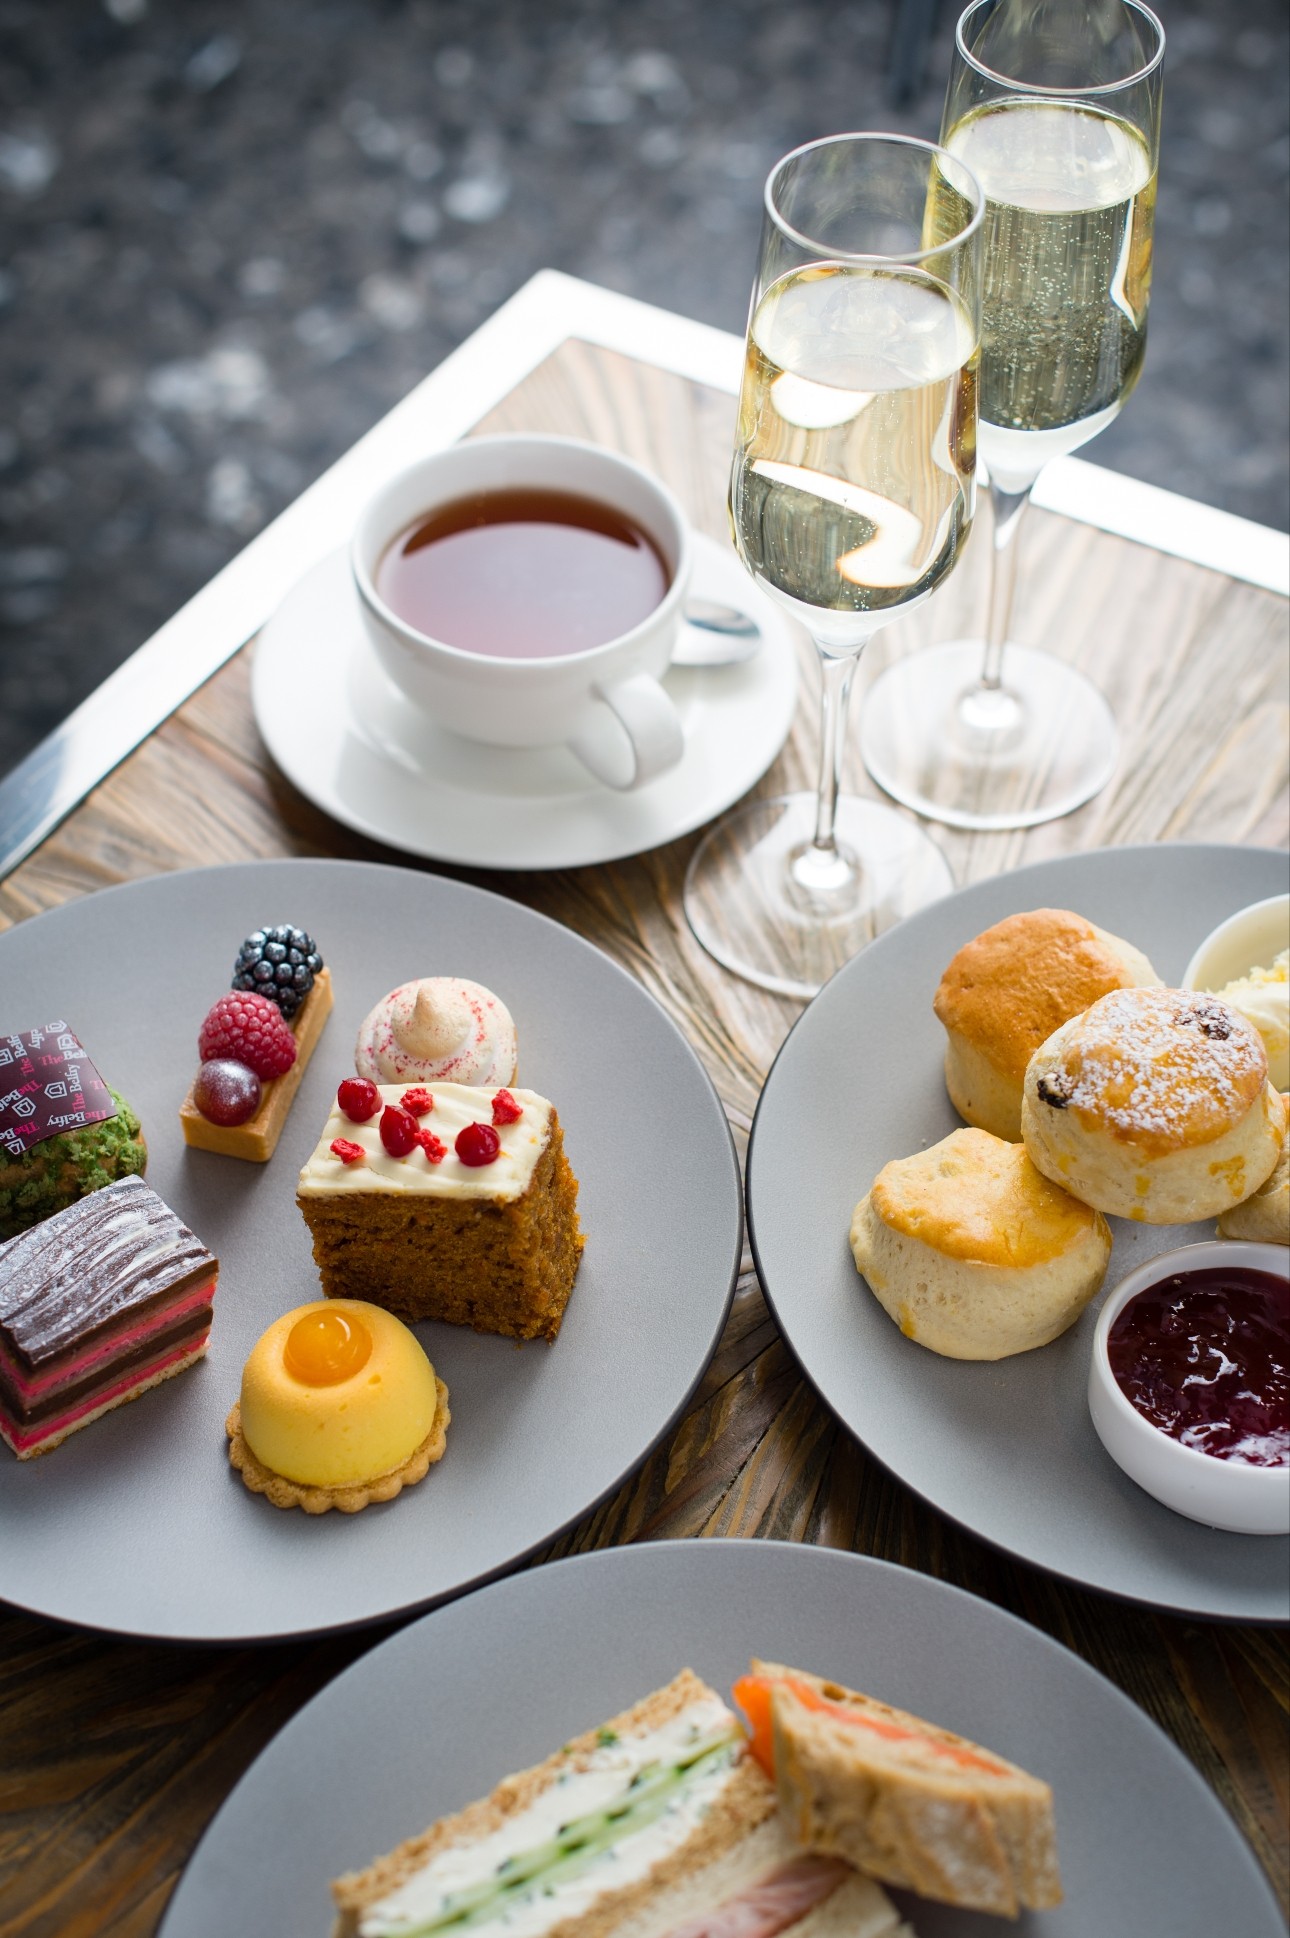 afternoon tea with sandwiches, cake, and fizz